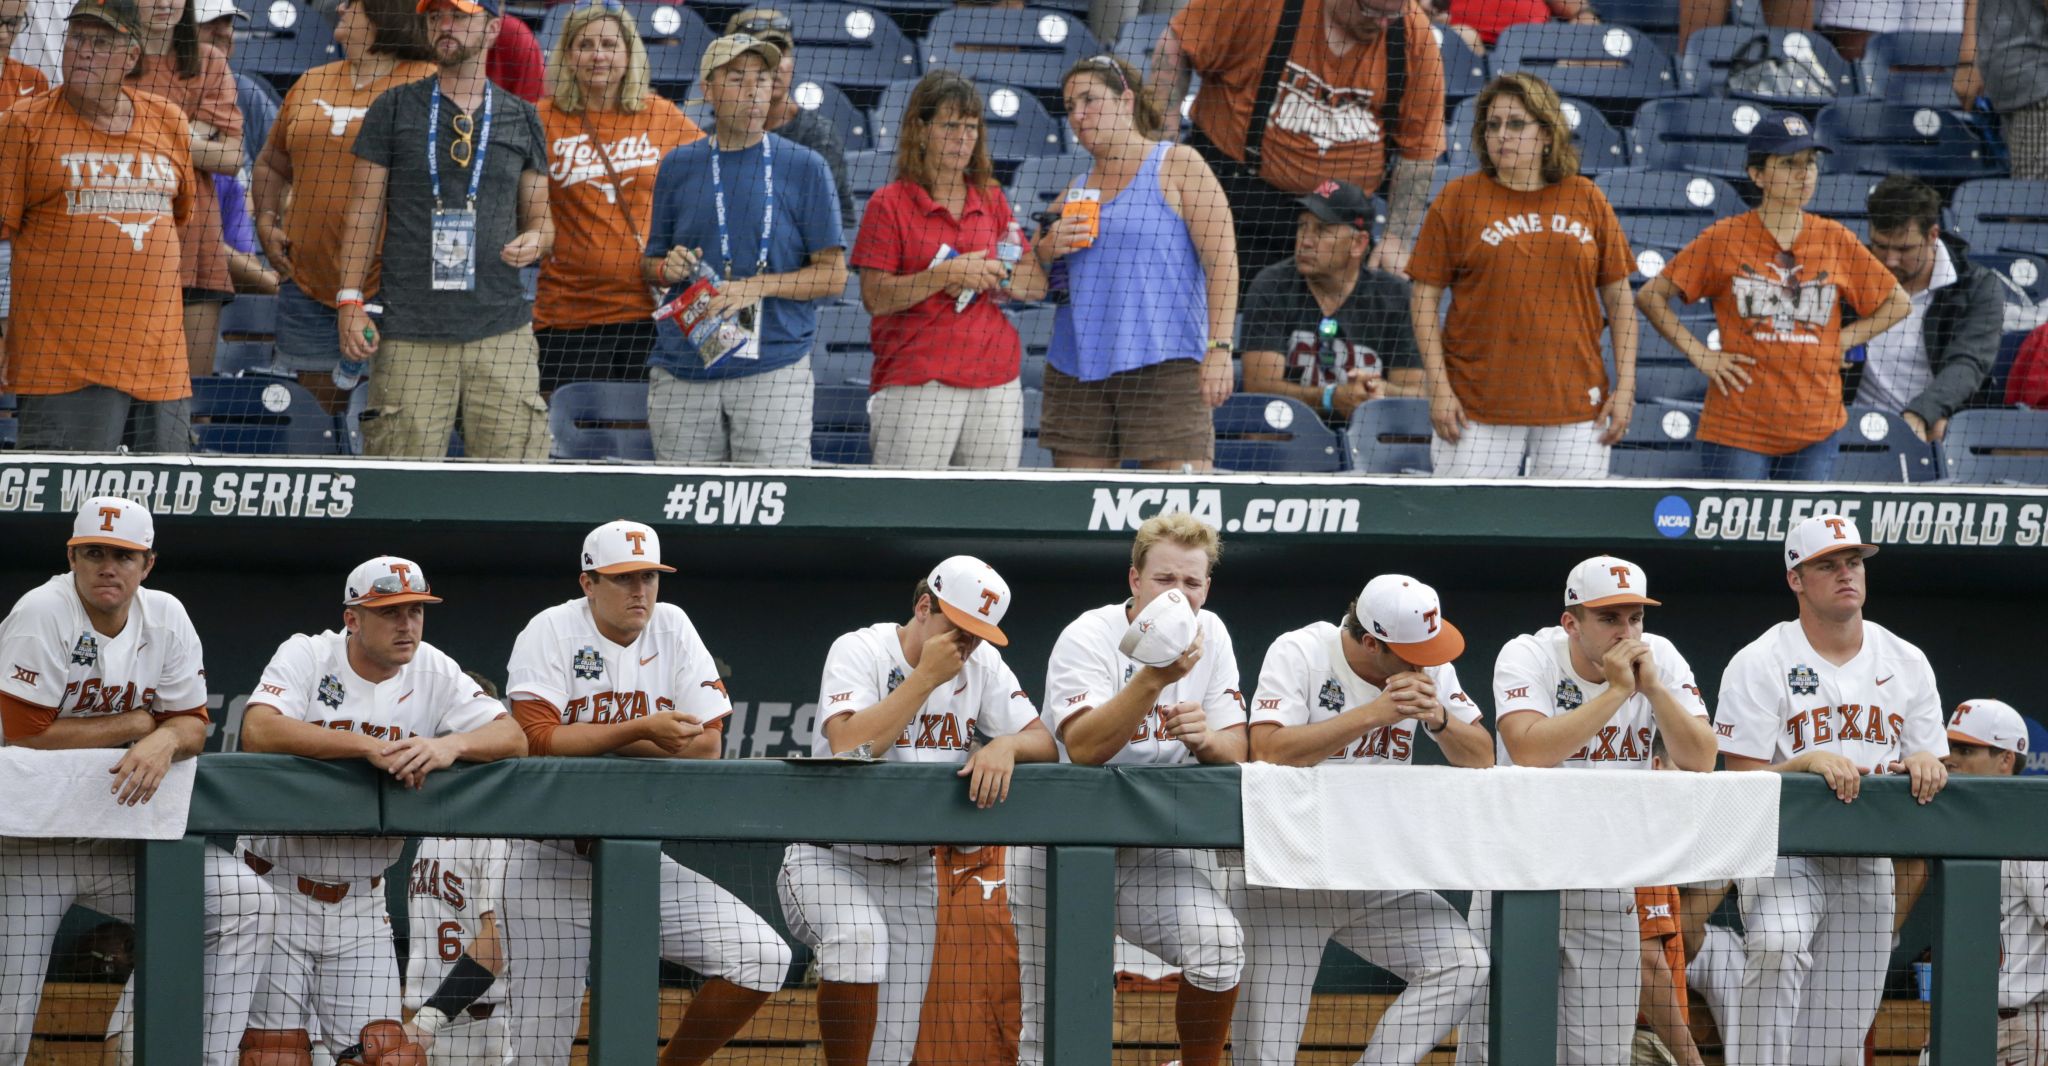 UT eliminated from College World Series by Florida